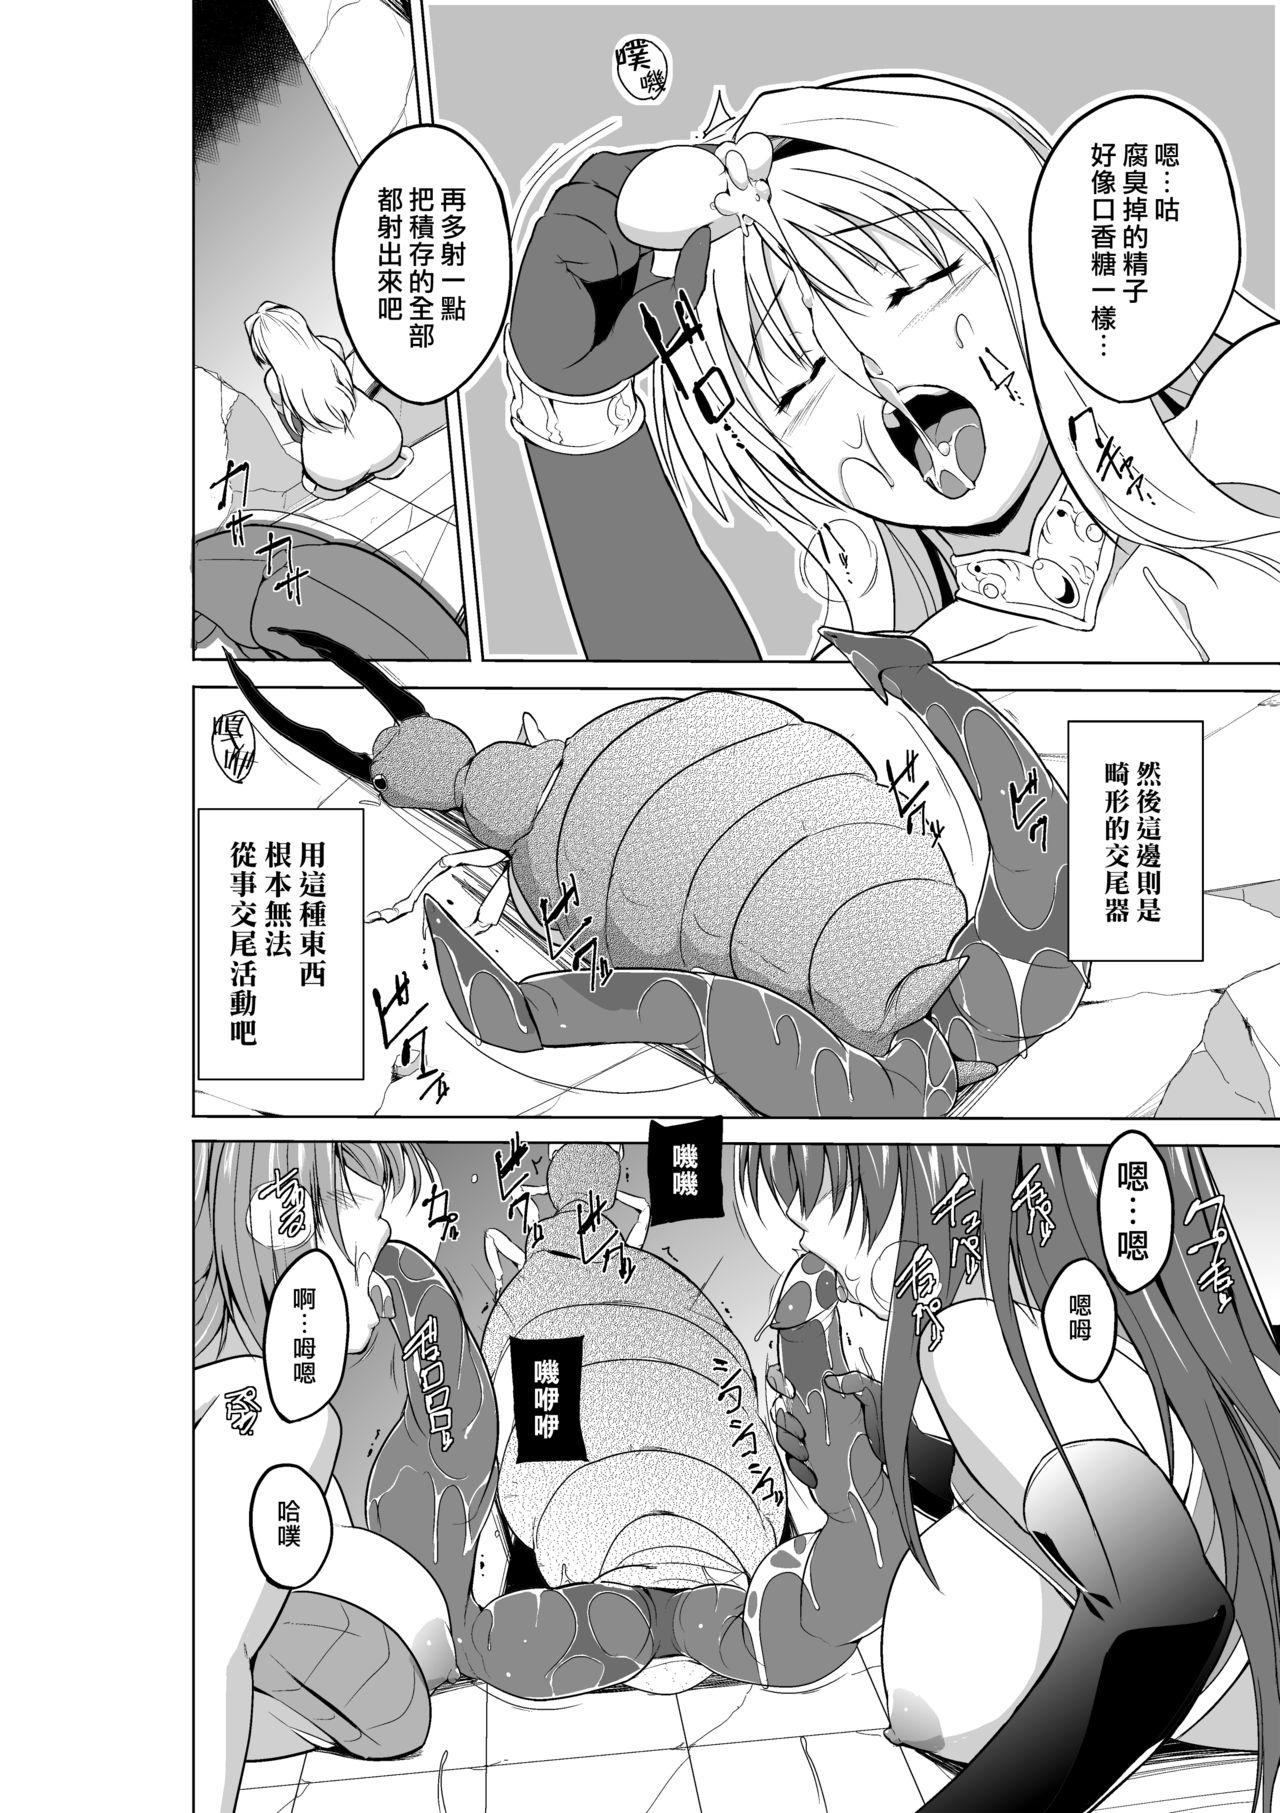 Pierced Dungeon Travelers Minna no Oyuugi - Toheart2 Ride - Page 6